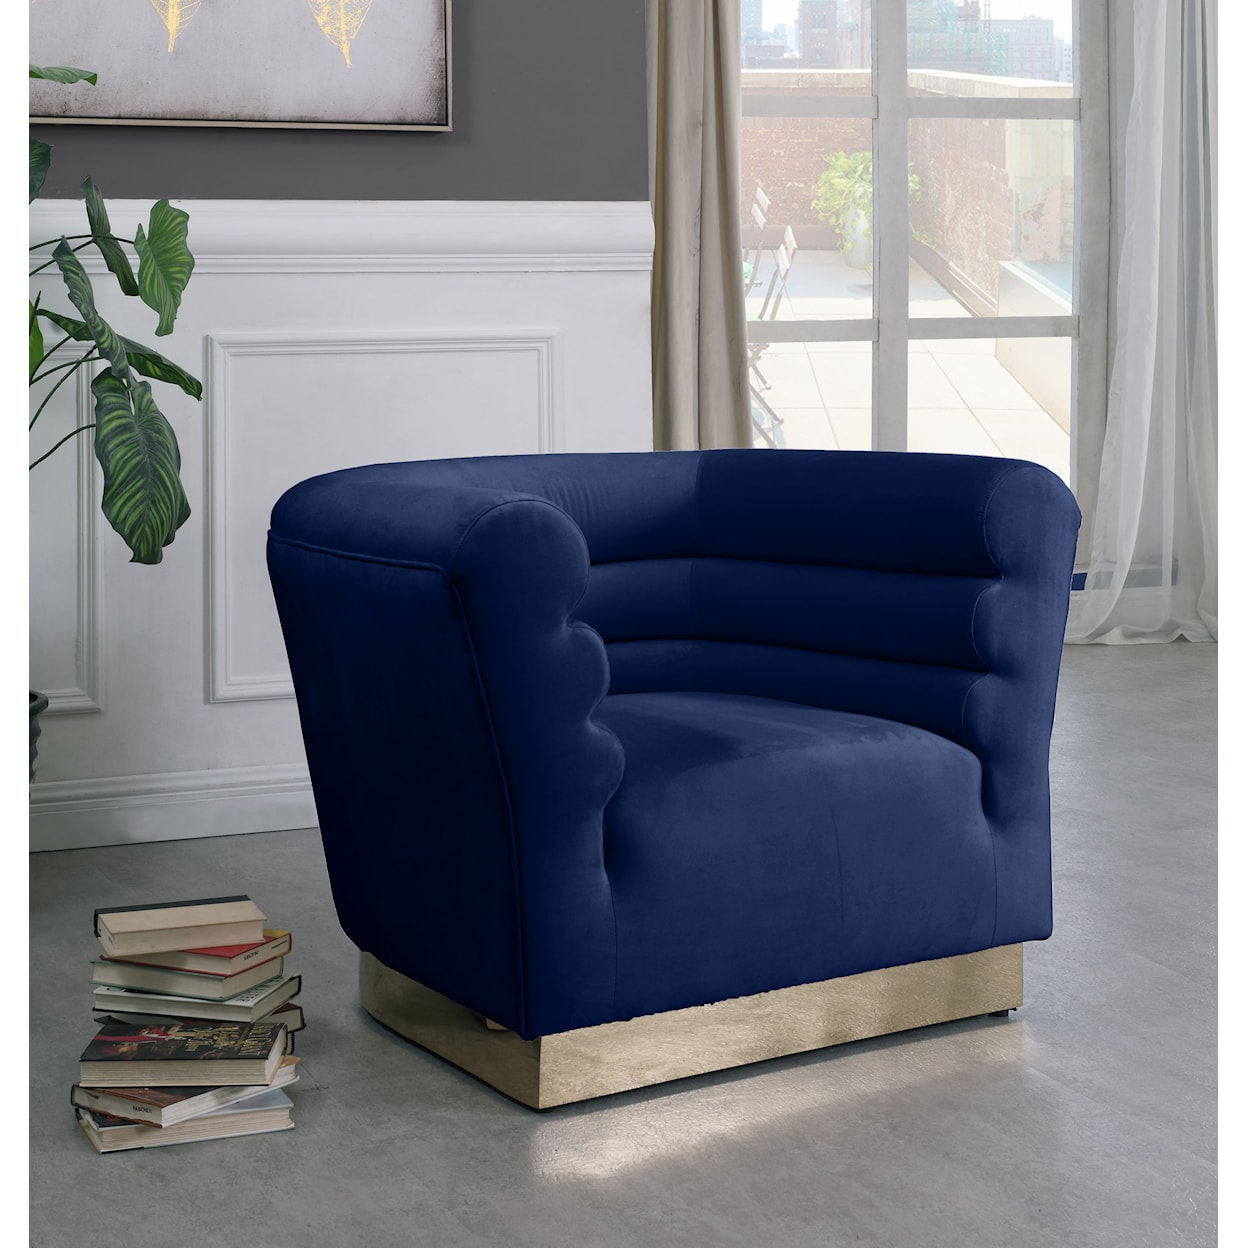 Meridian Furniture Bellini Navy Velvet Accent Chair with Gold Base